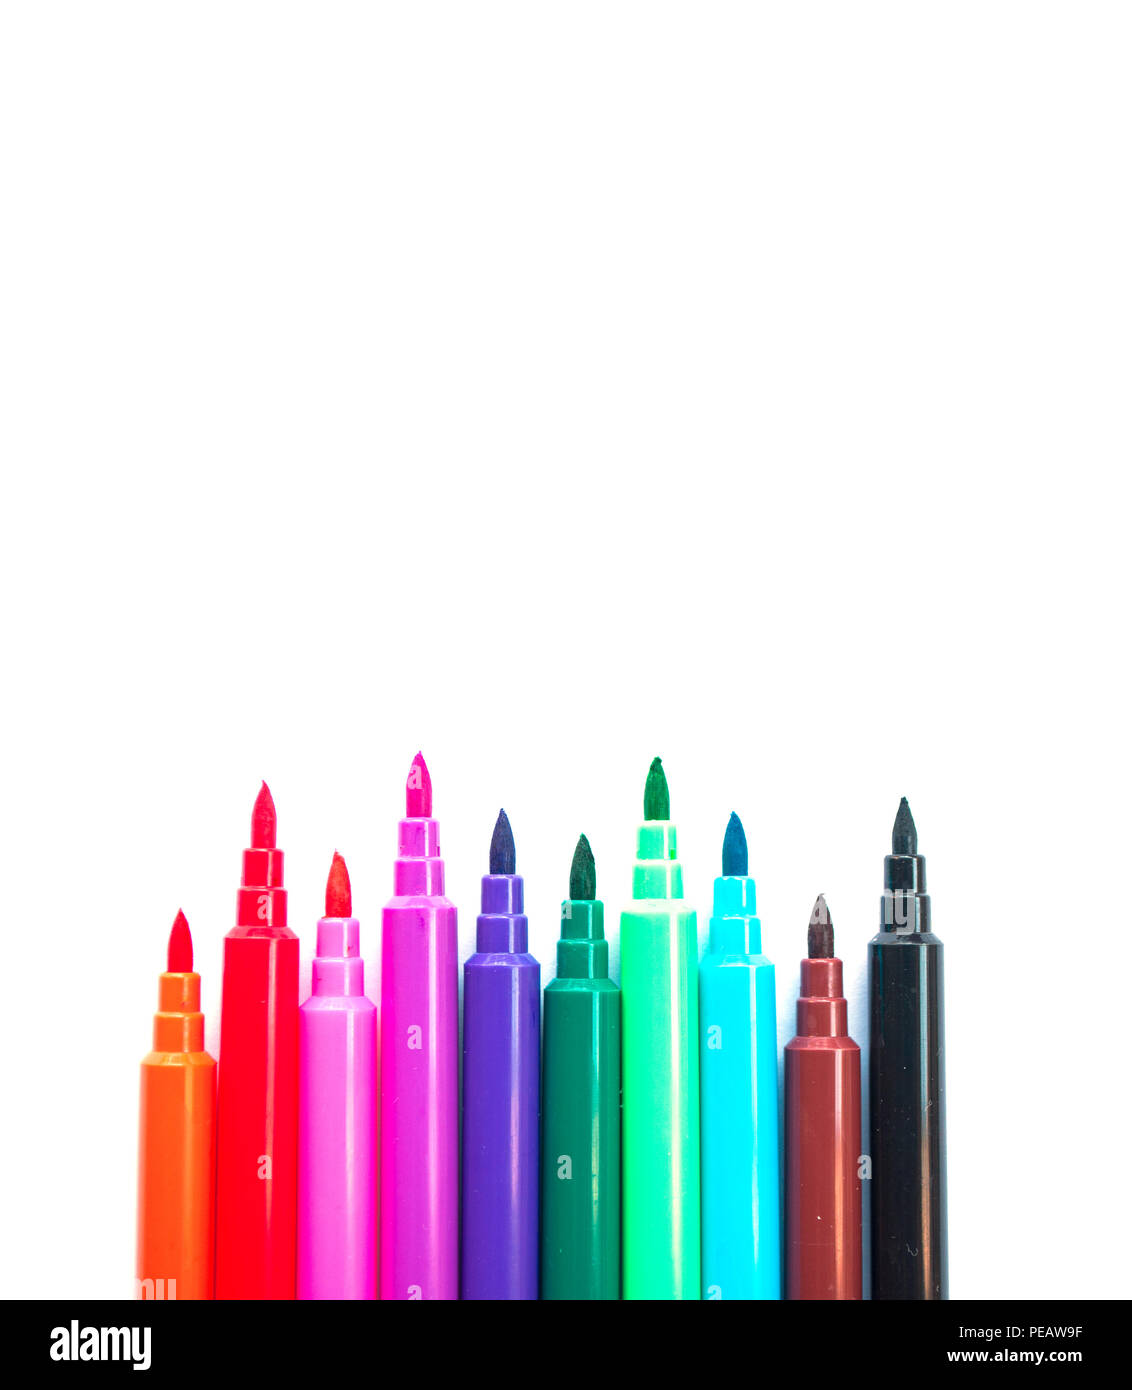 https://c8.alamy.com/comp/PEAW9F/colorful-marker-pen-set-isolated-on-white-background-with-copyspace-PEAW9F.jpg